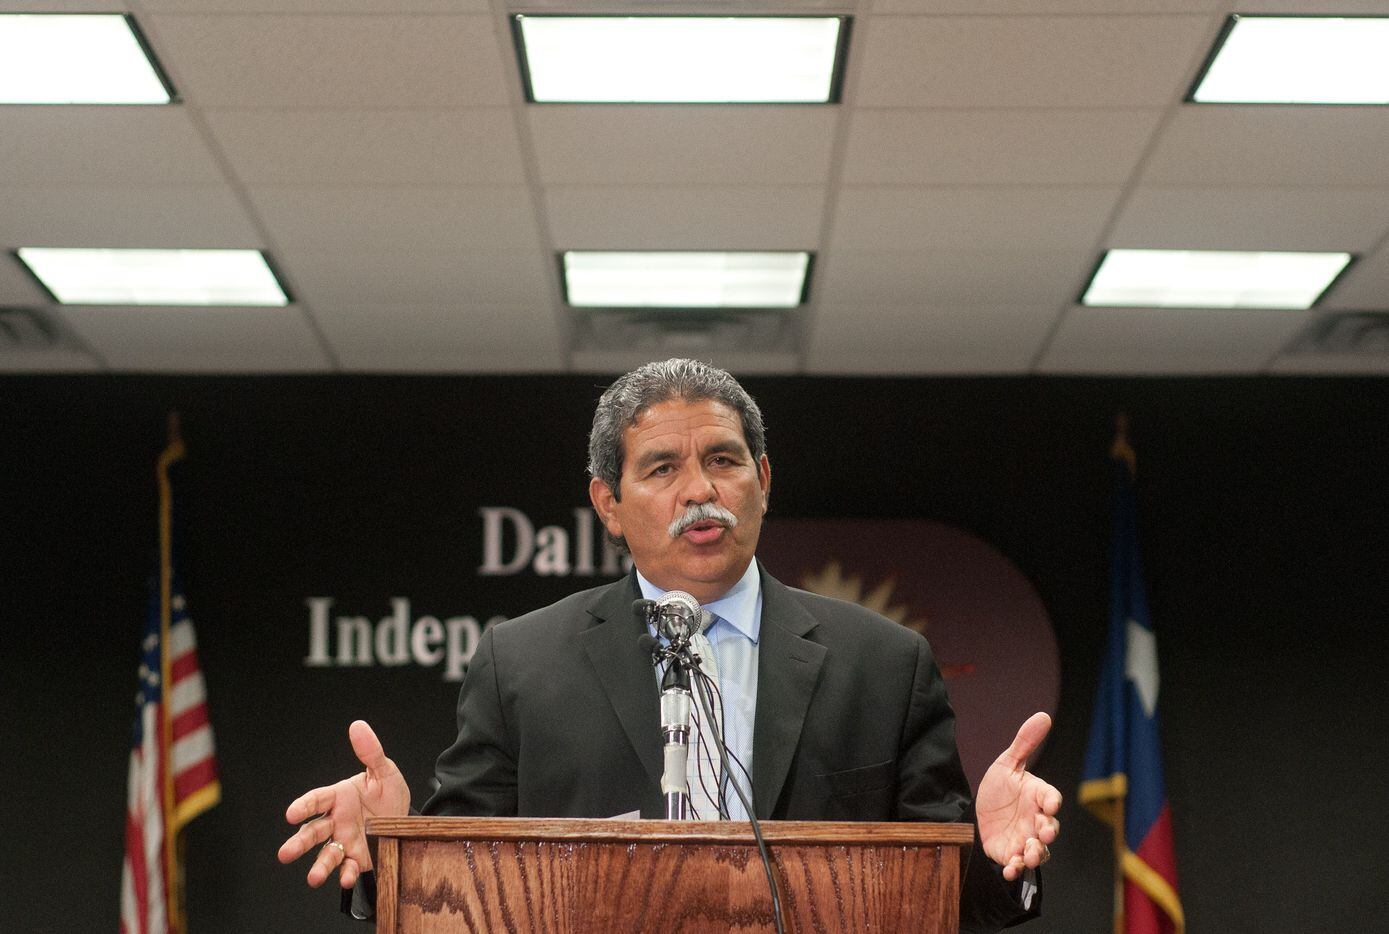 Dallas ISD Superintendent Michael Hinojosa explains his reasons for leaving the district to...